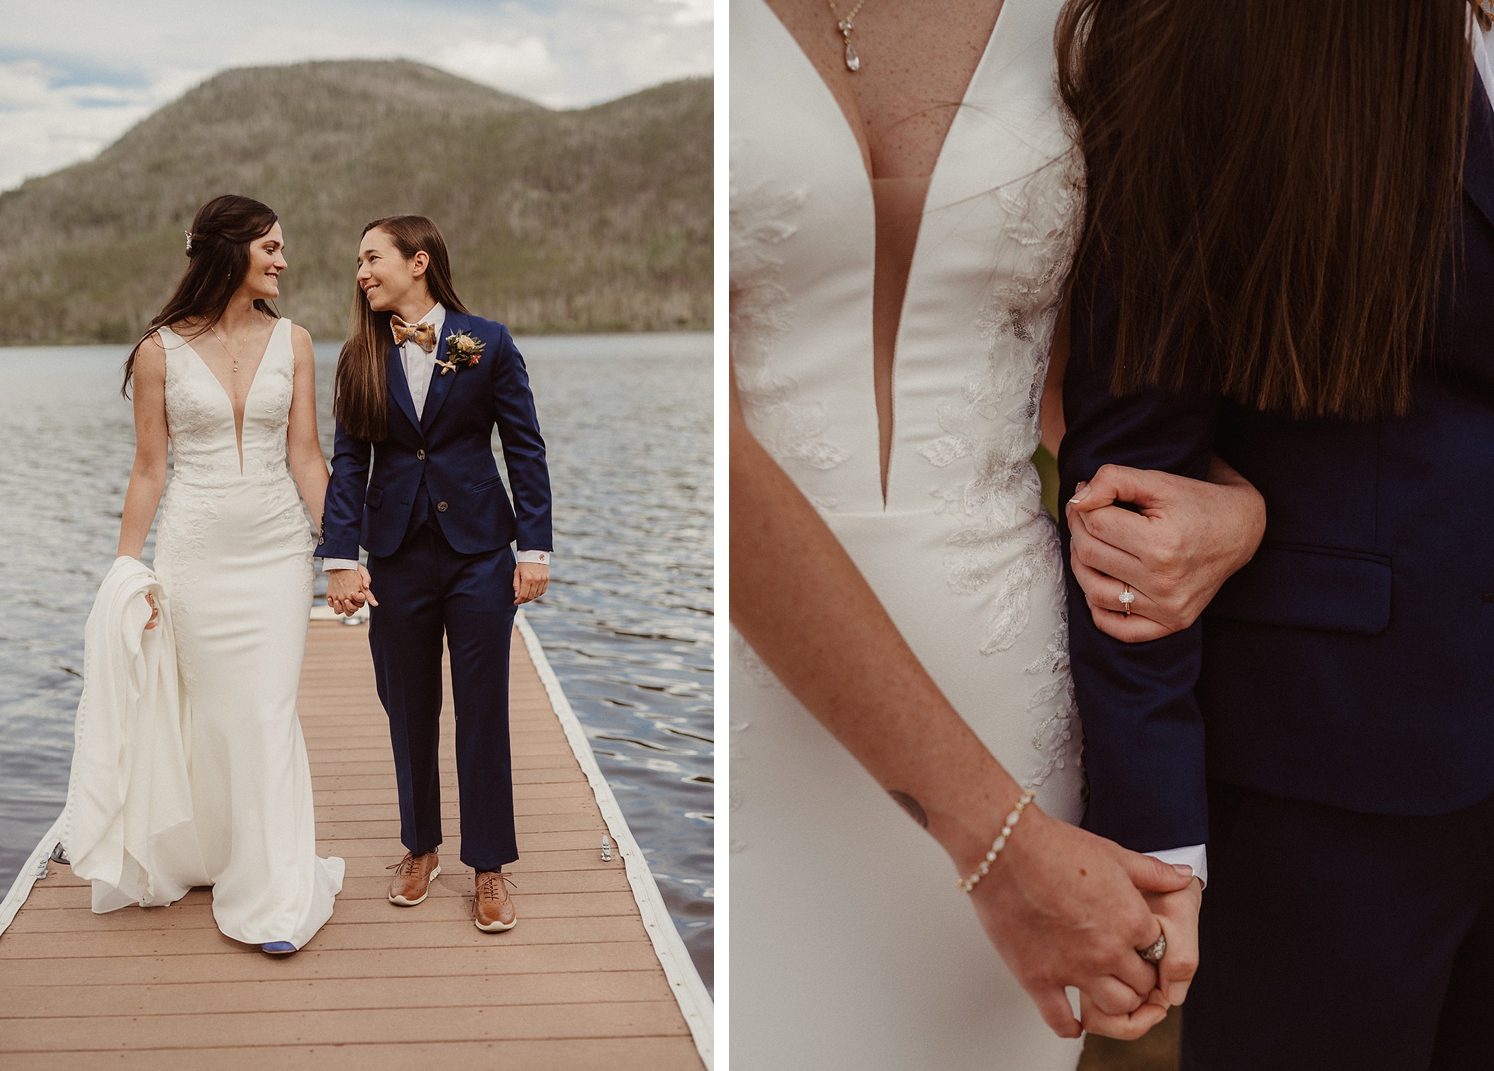 Partners walking down dock holding hands at Colorado Airbnb wedding | Partner holding partner's hand and arm before Colorado Airbnb wedding ceremony | McArthur Weddings and Events